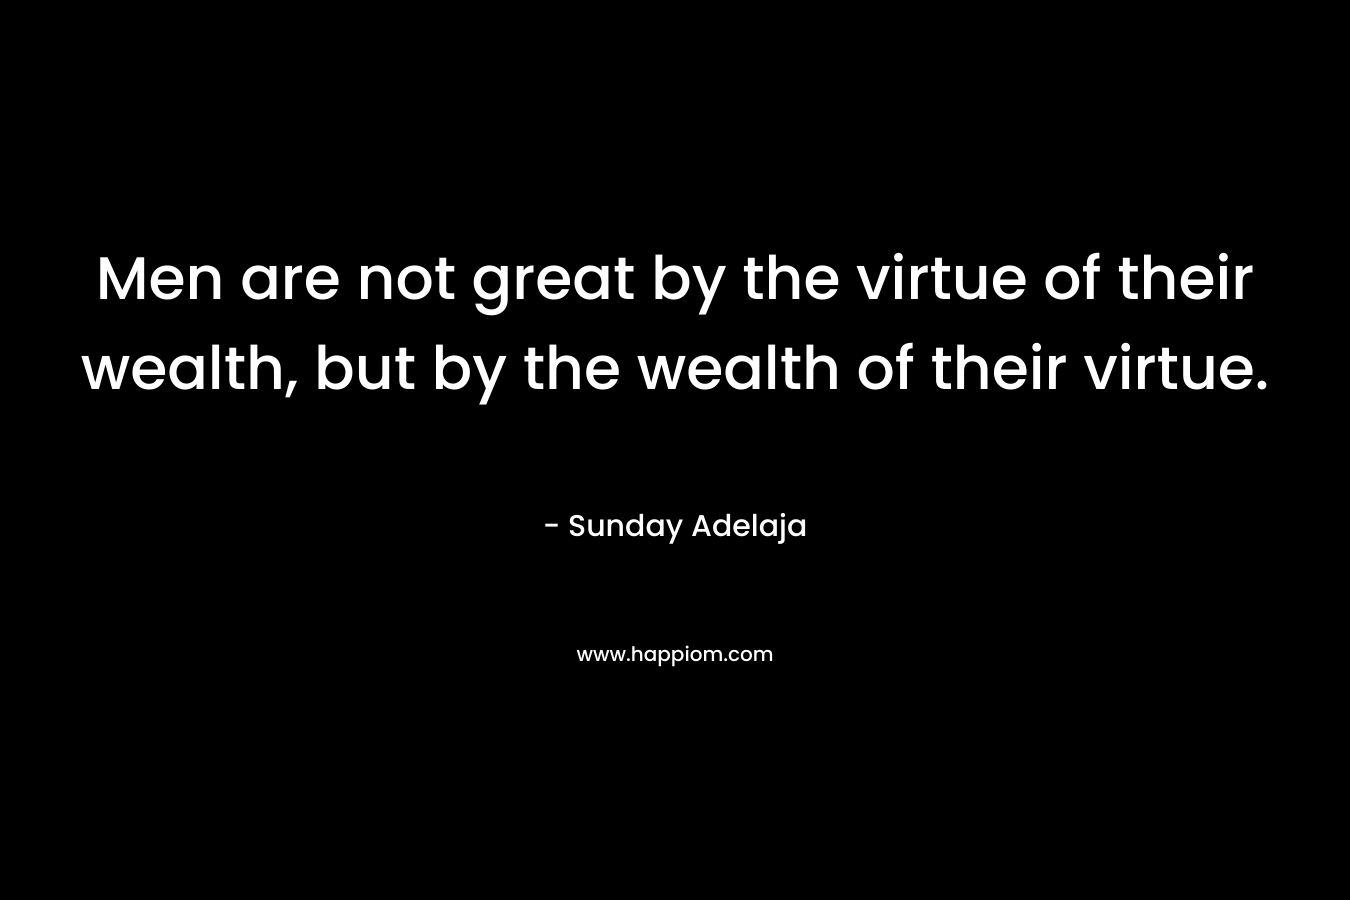 Men are not great by the virtue of their wealth, but by the wealth of their virtue.